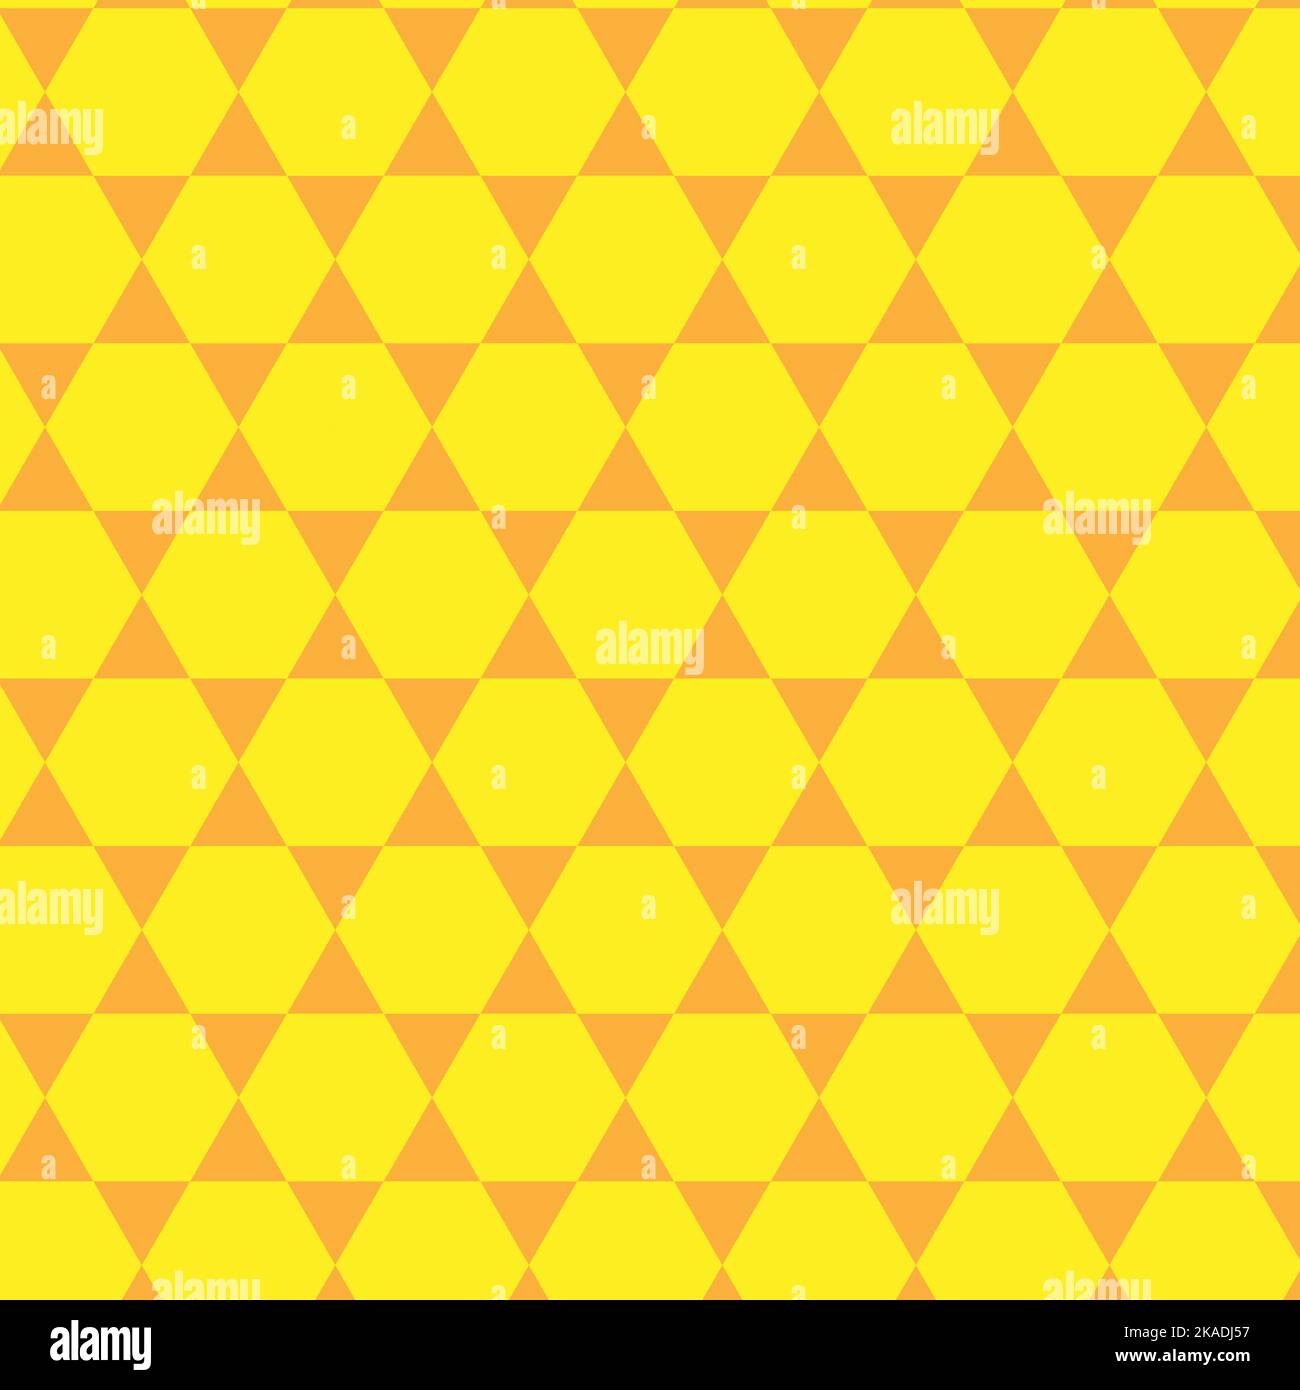 Vector seamless pattern of geometric shapes. Yellow hexagons and triangles allover print. Stock Vector